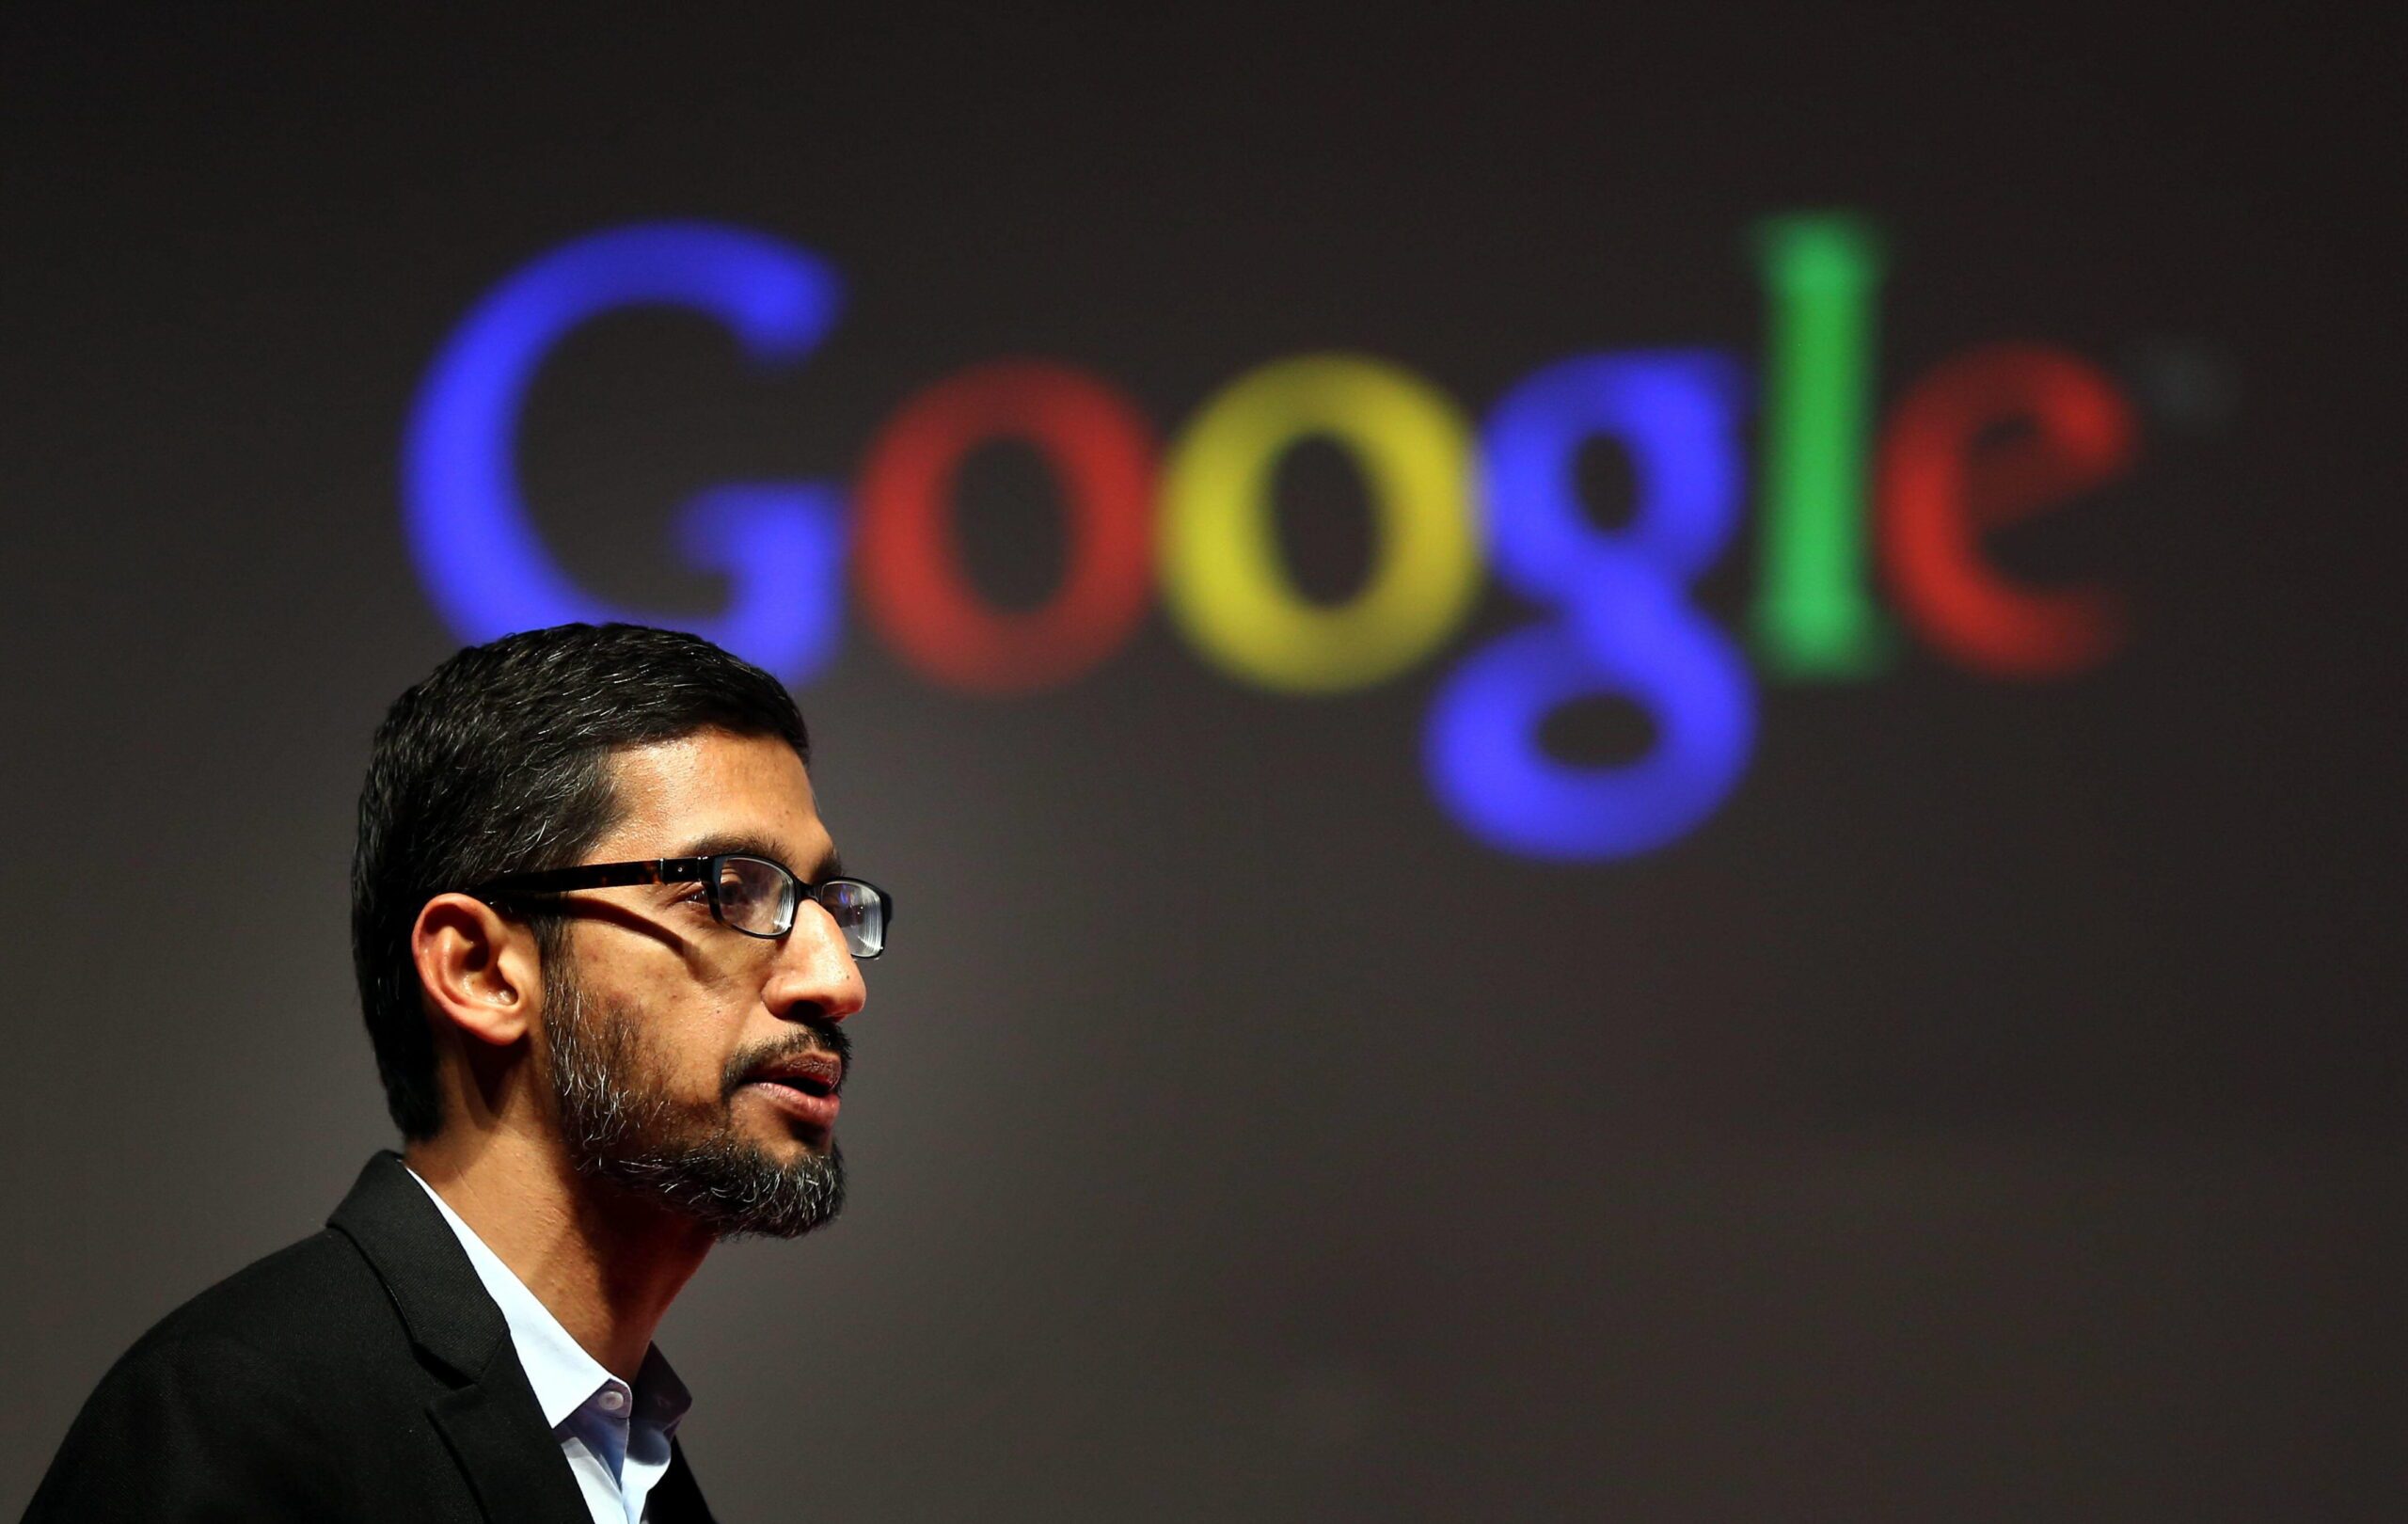 Google CEO defends Europe tax practices, warns on Brexit